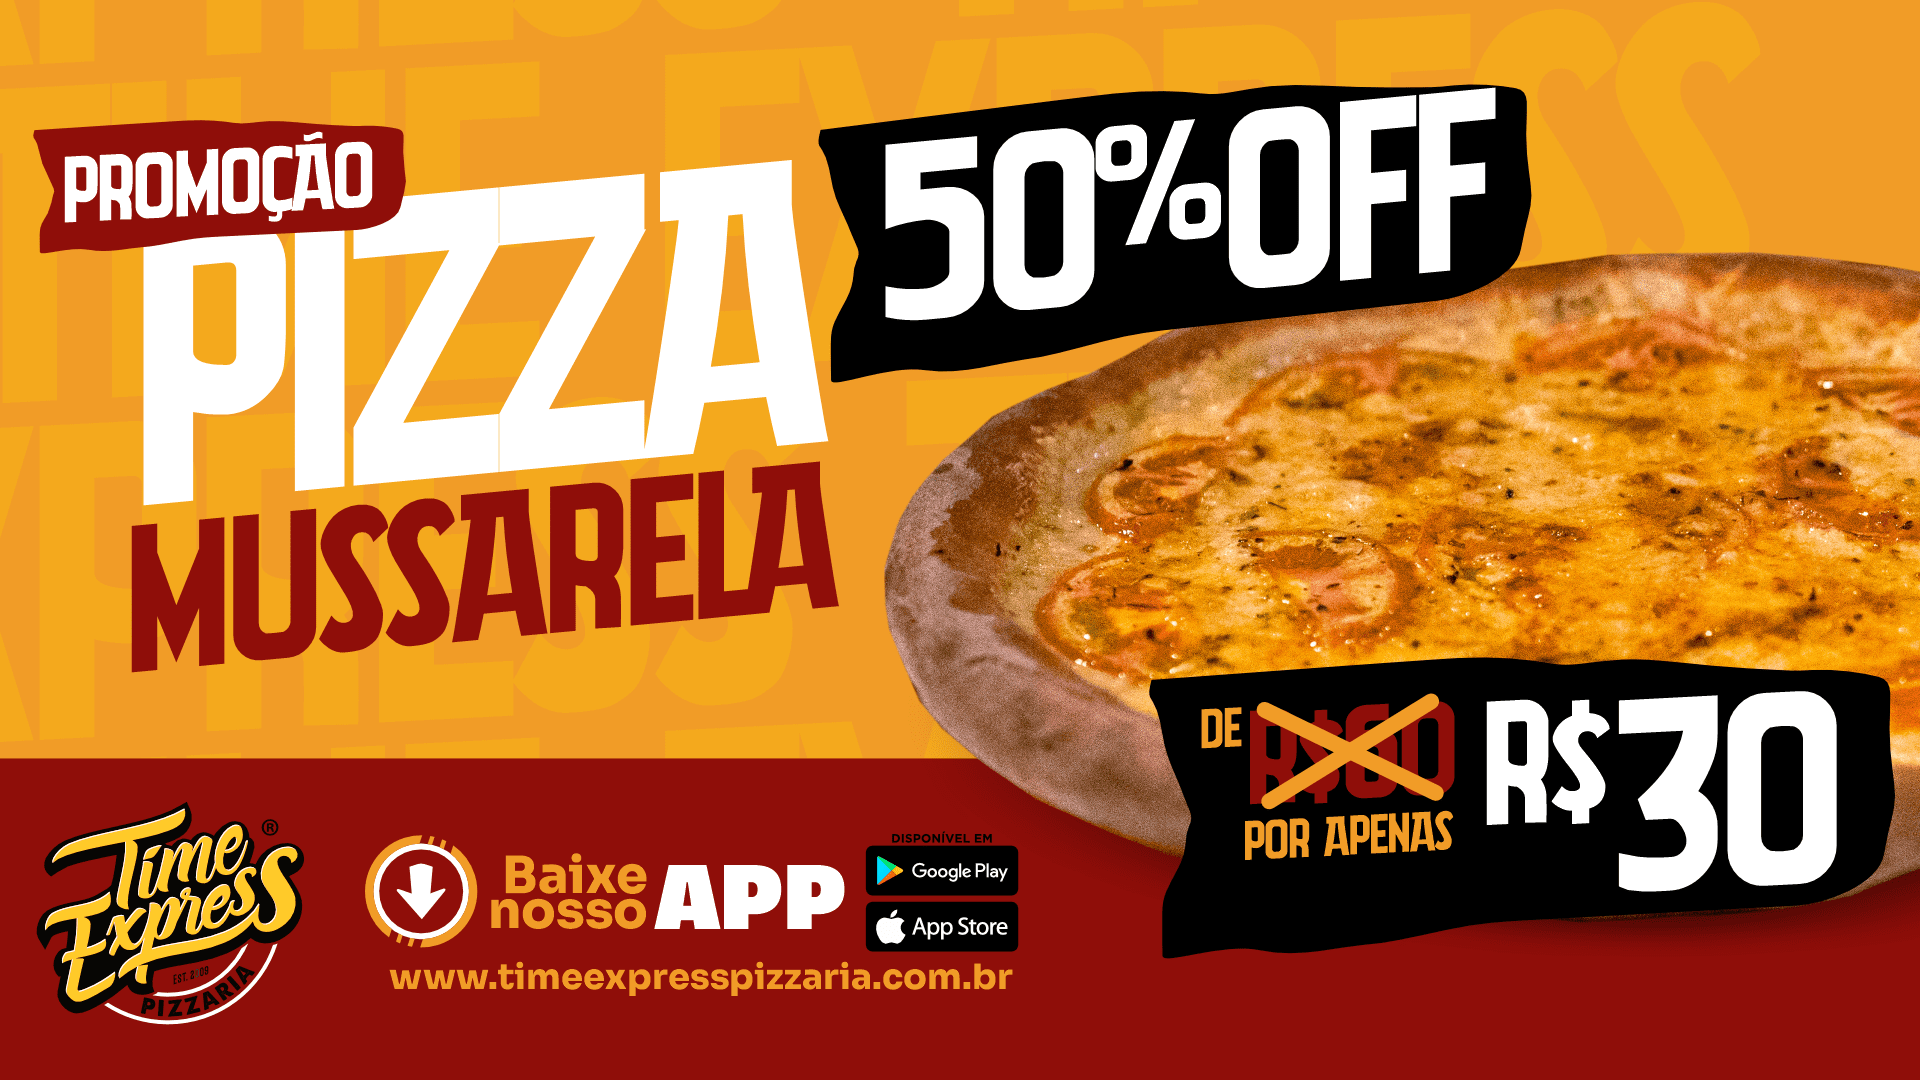 Super Pizza - Apps on Google Play